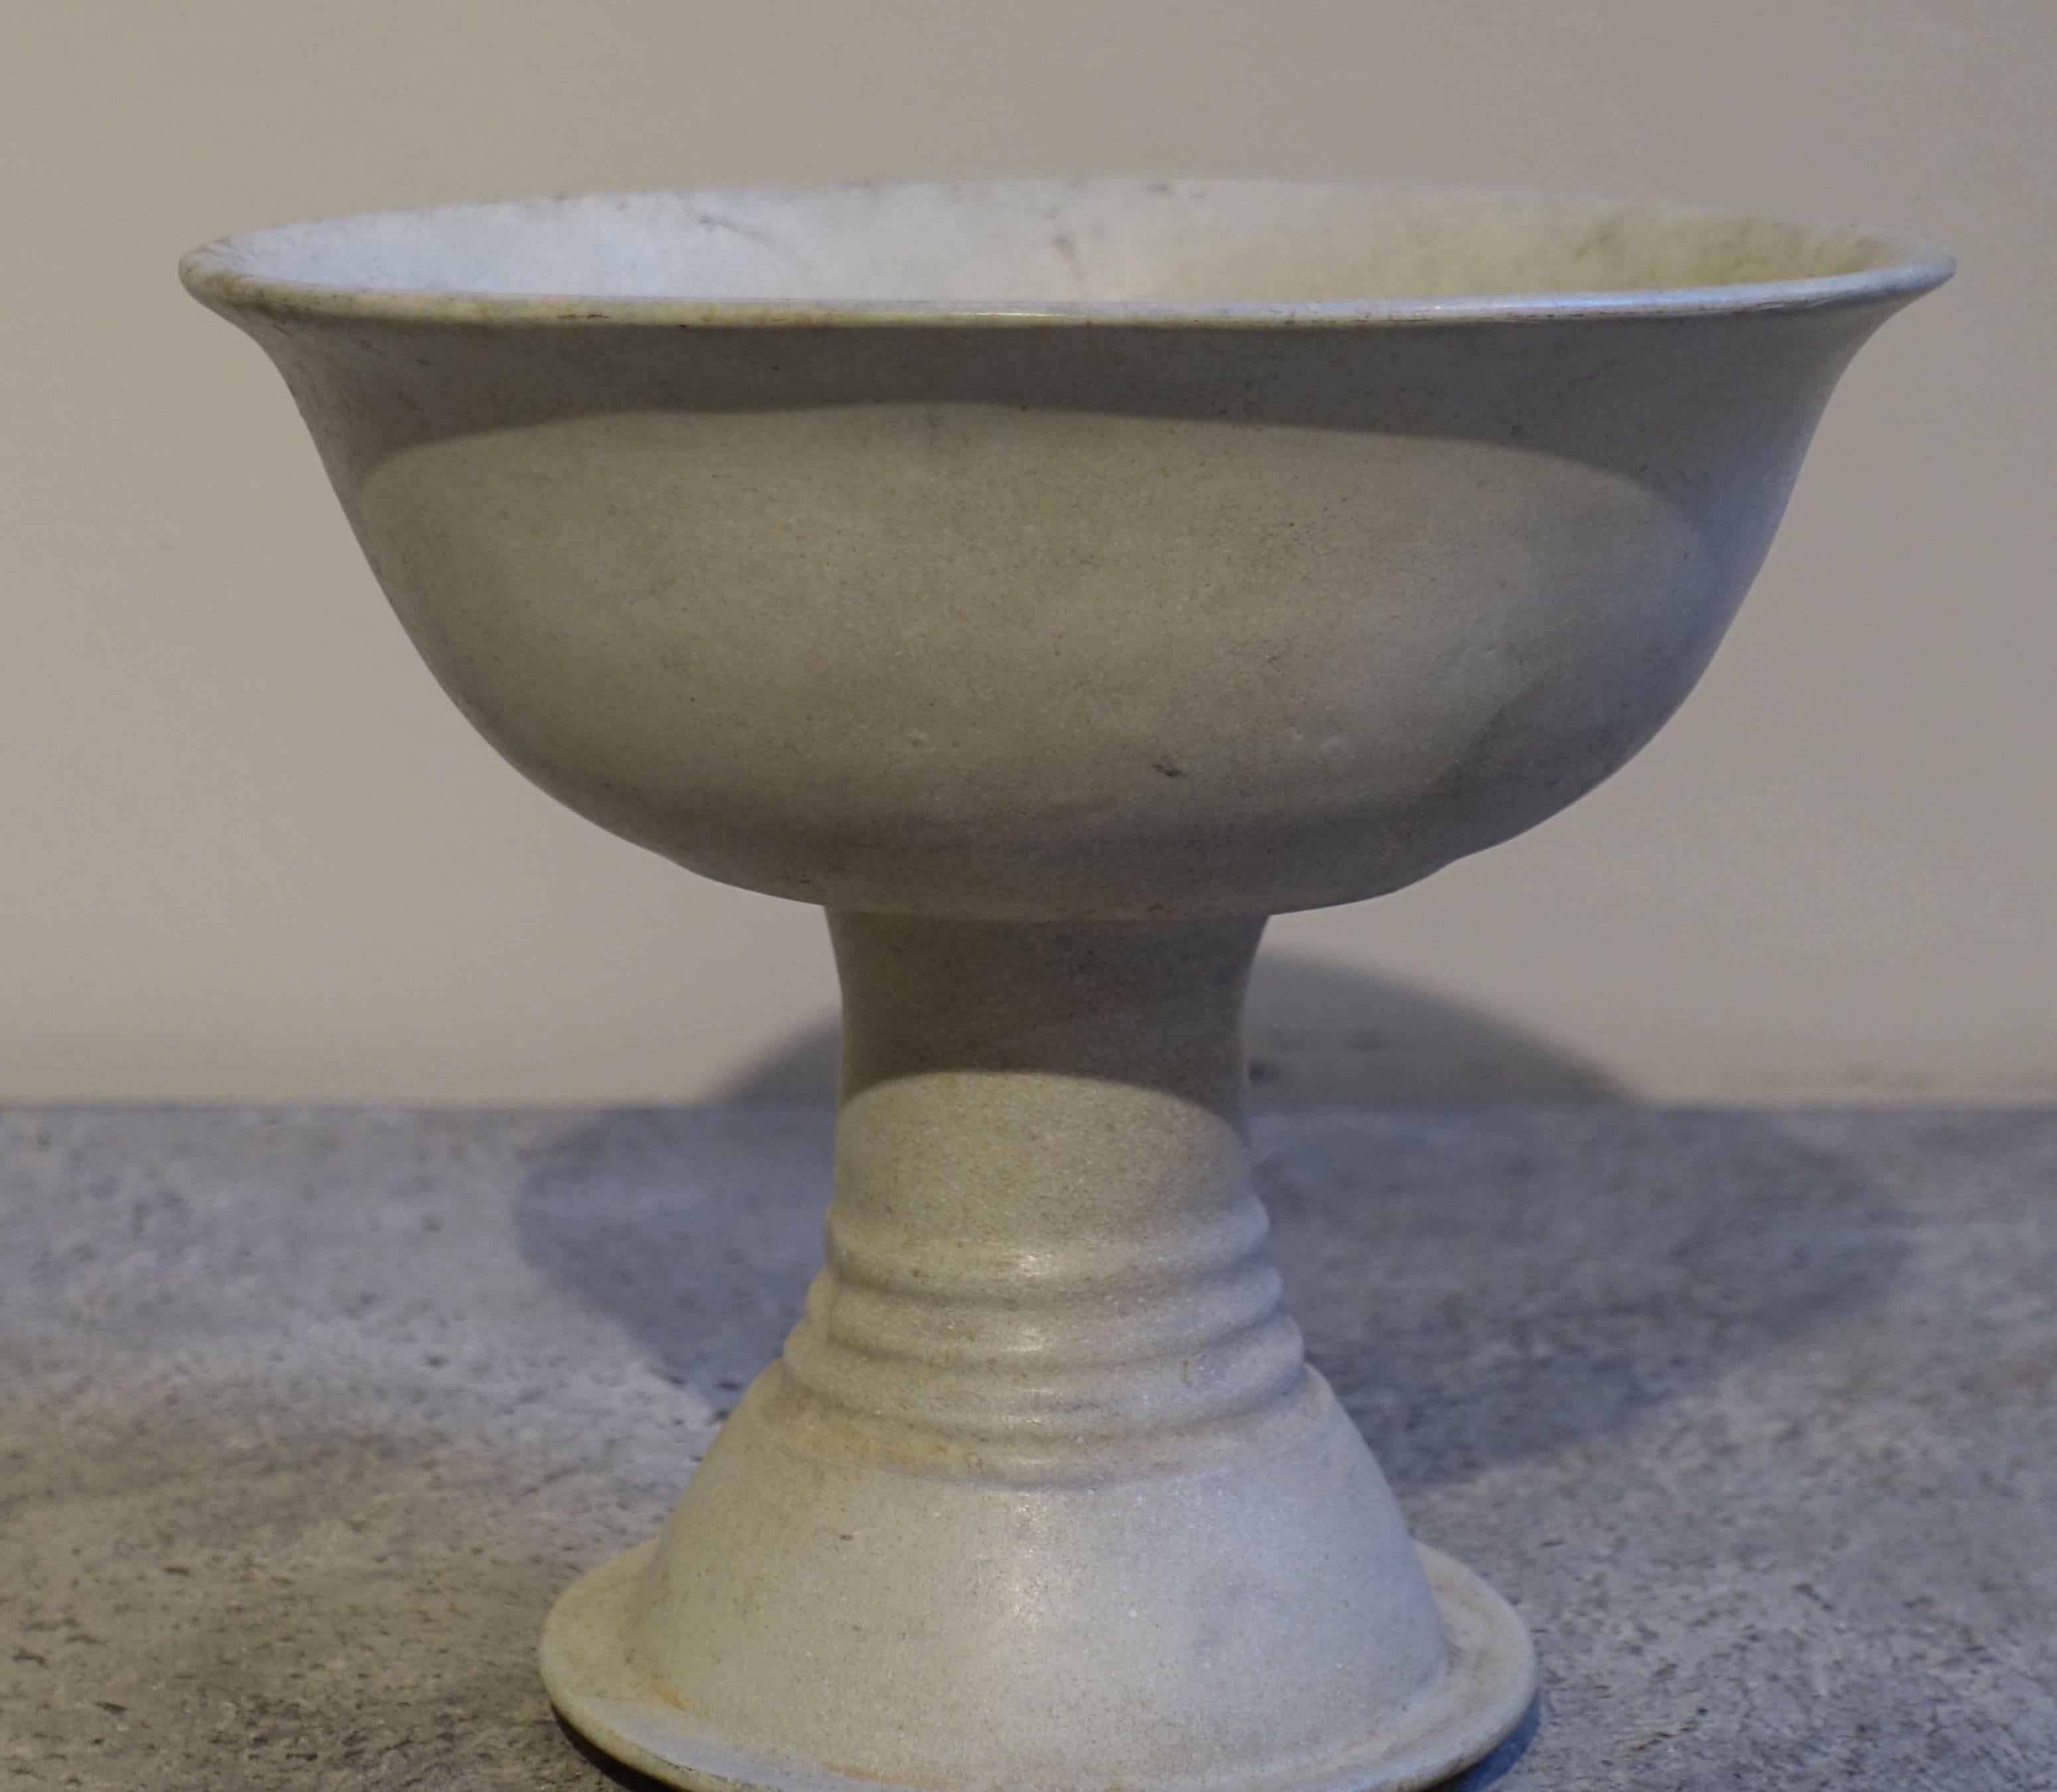 19th century cream footed bowl from Thailand.
ARRIVING APRIL